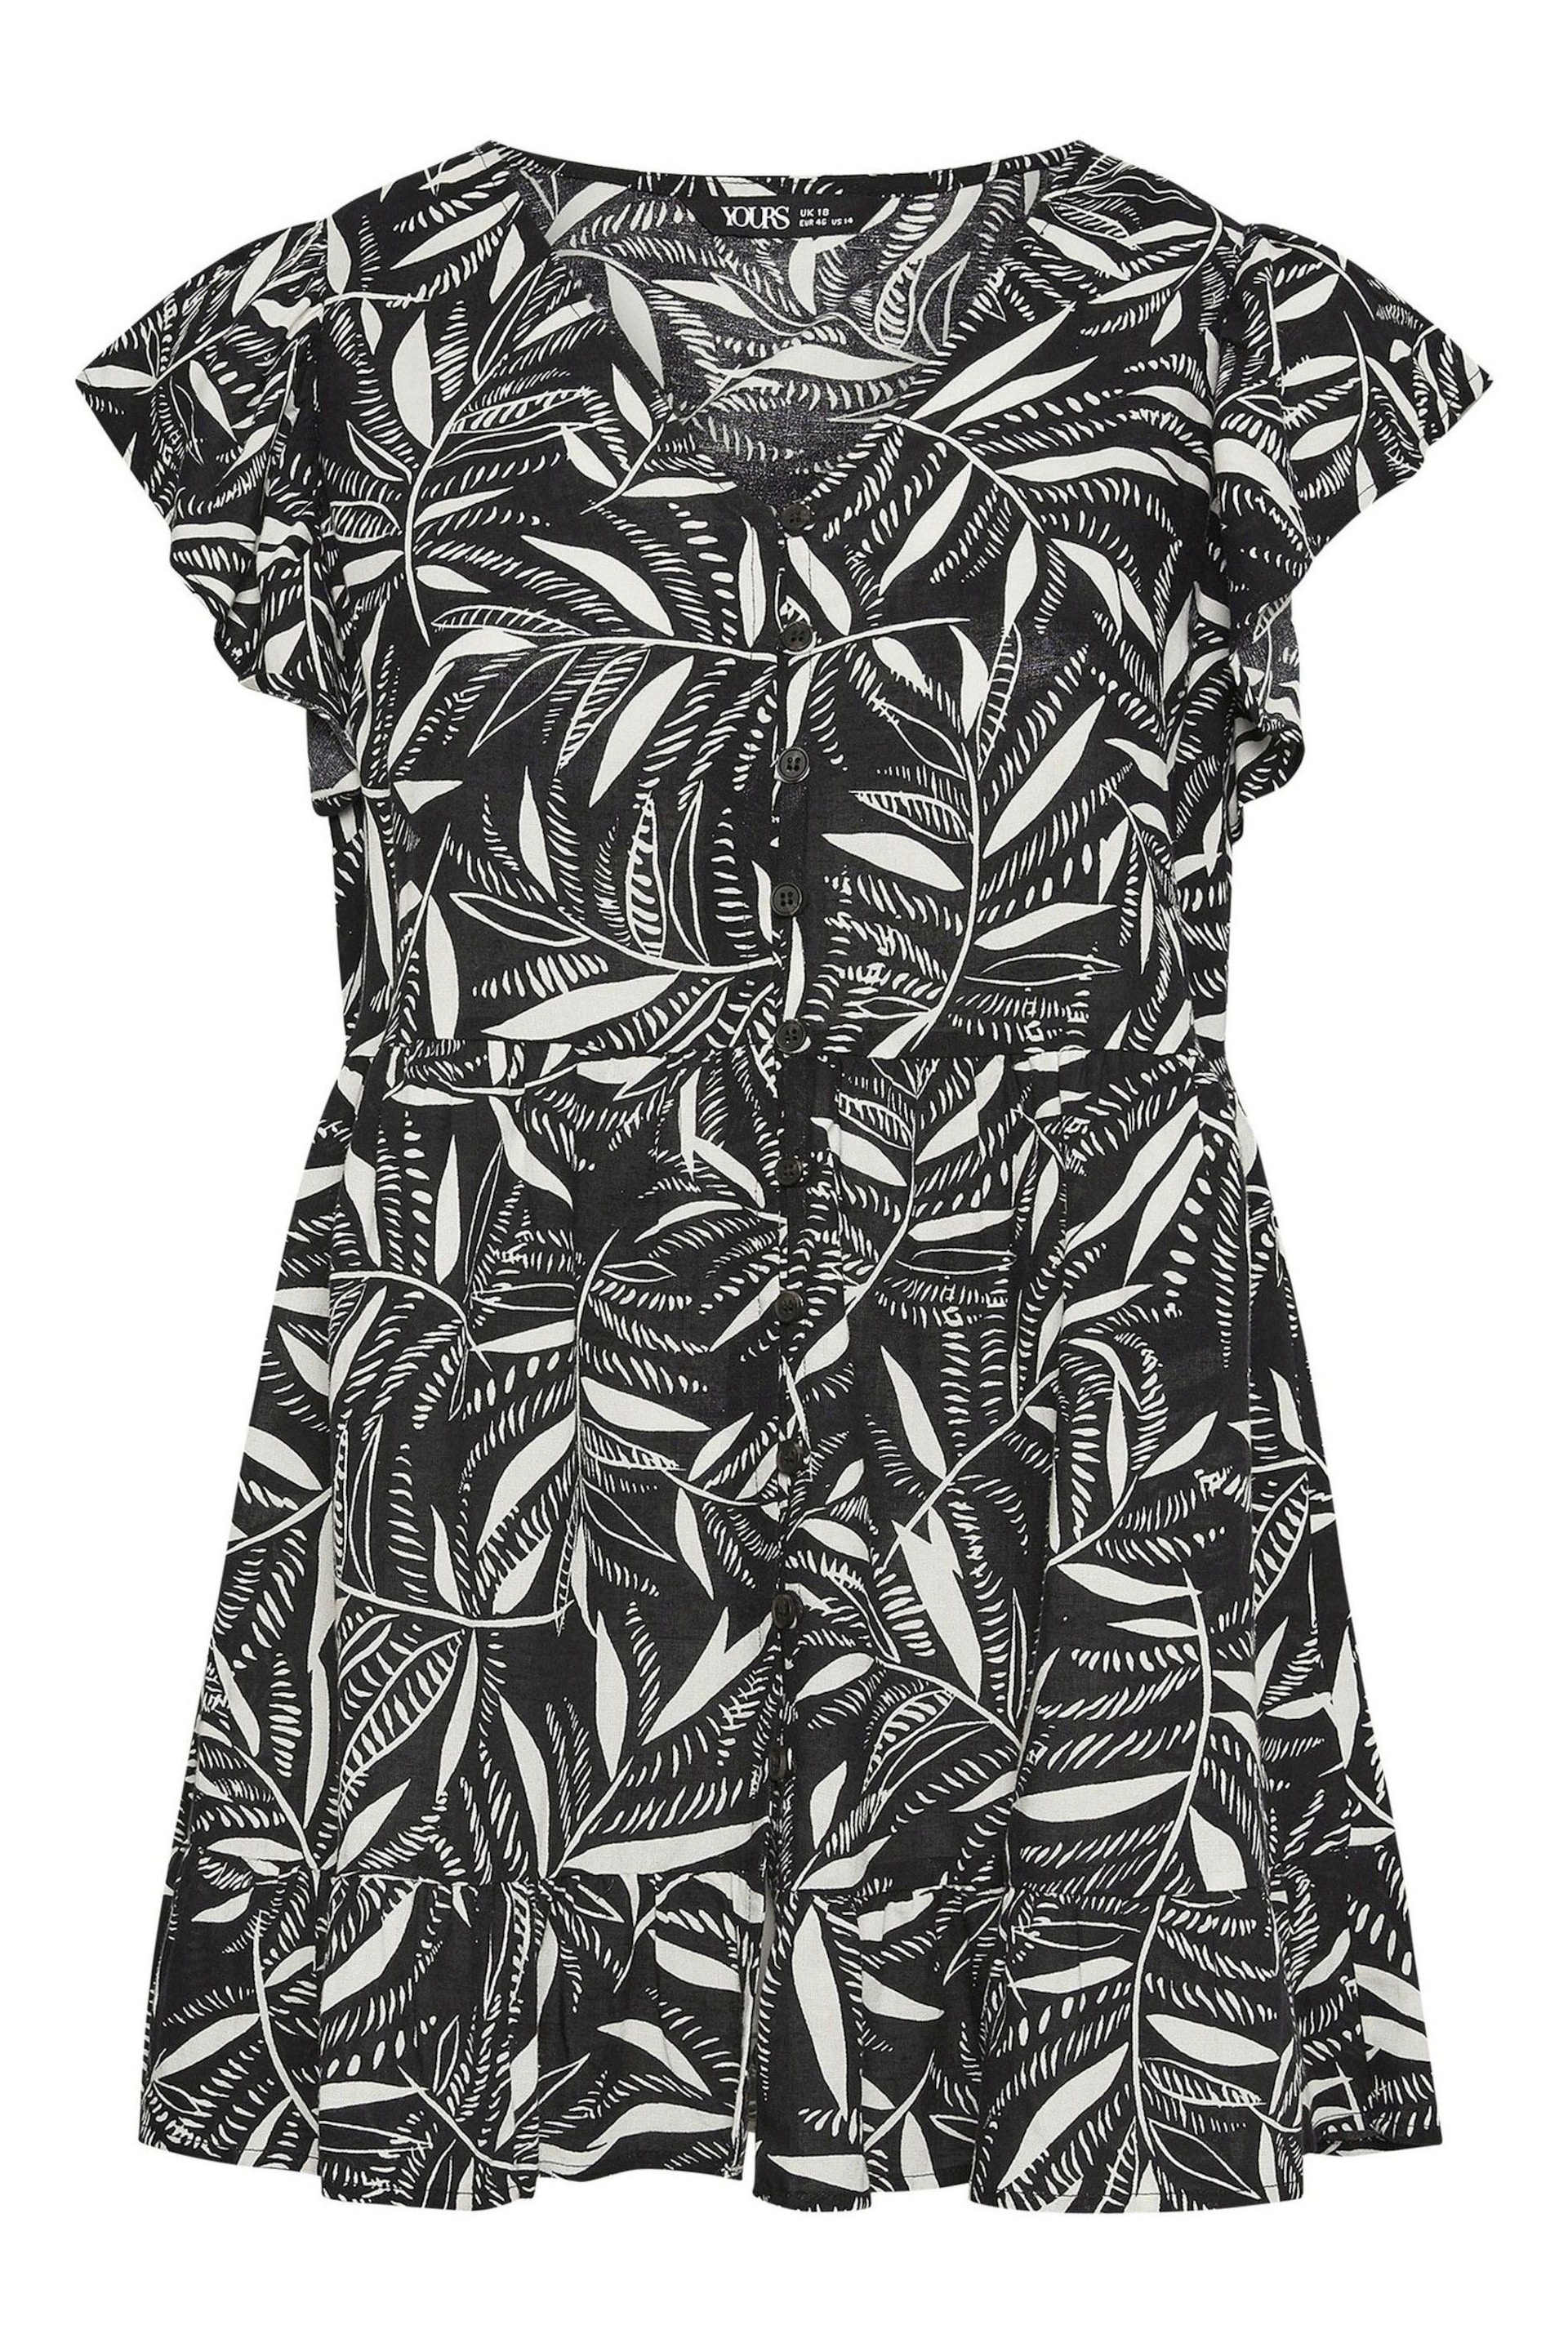 Yours Curve Black Leaf Print Frill Blouse - Image 5 of 5